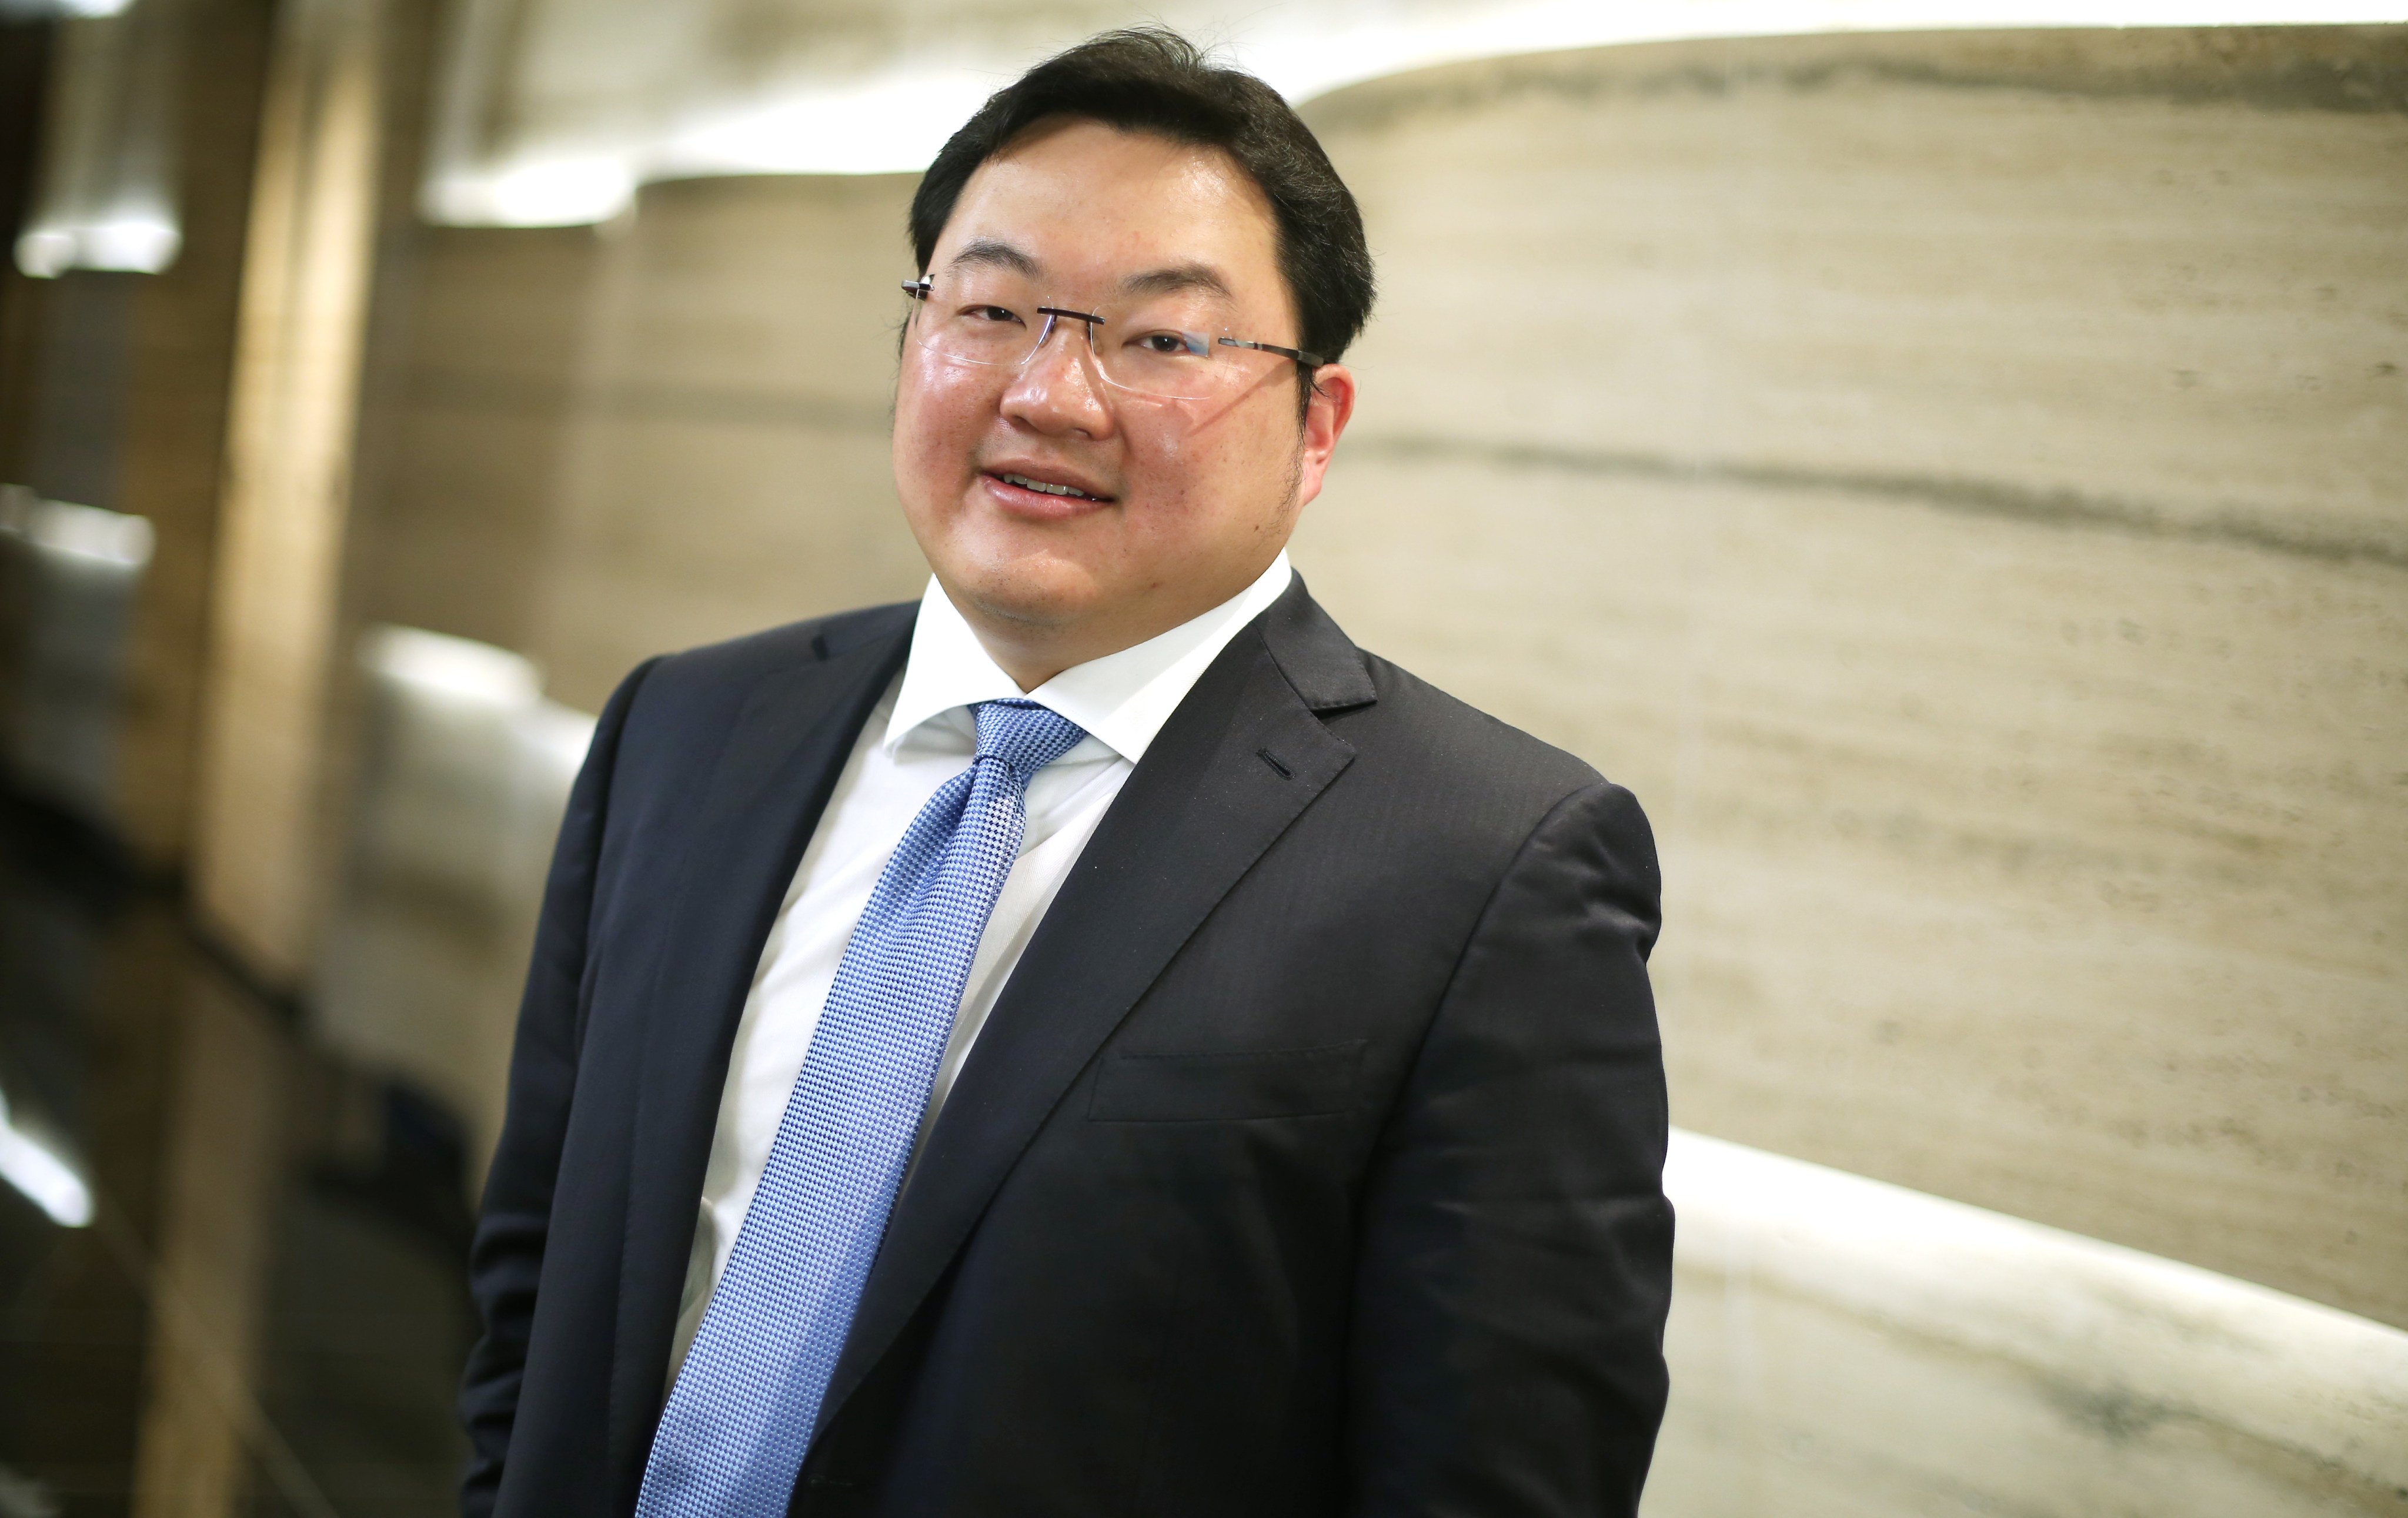 The US Department of Justice announced on Wednesday that it has reached an agreement with Malaysian financier Jho Low to recover more than US$100 million in connection with the 1MDB scandal. Photo: Sam Tsang